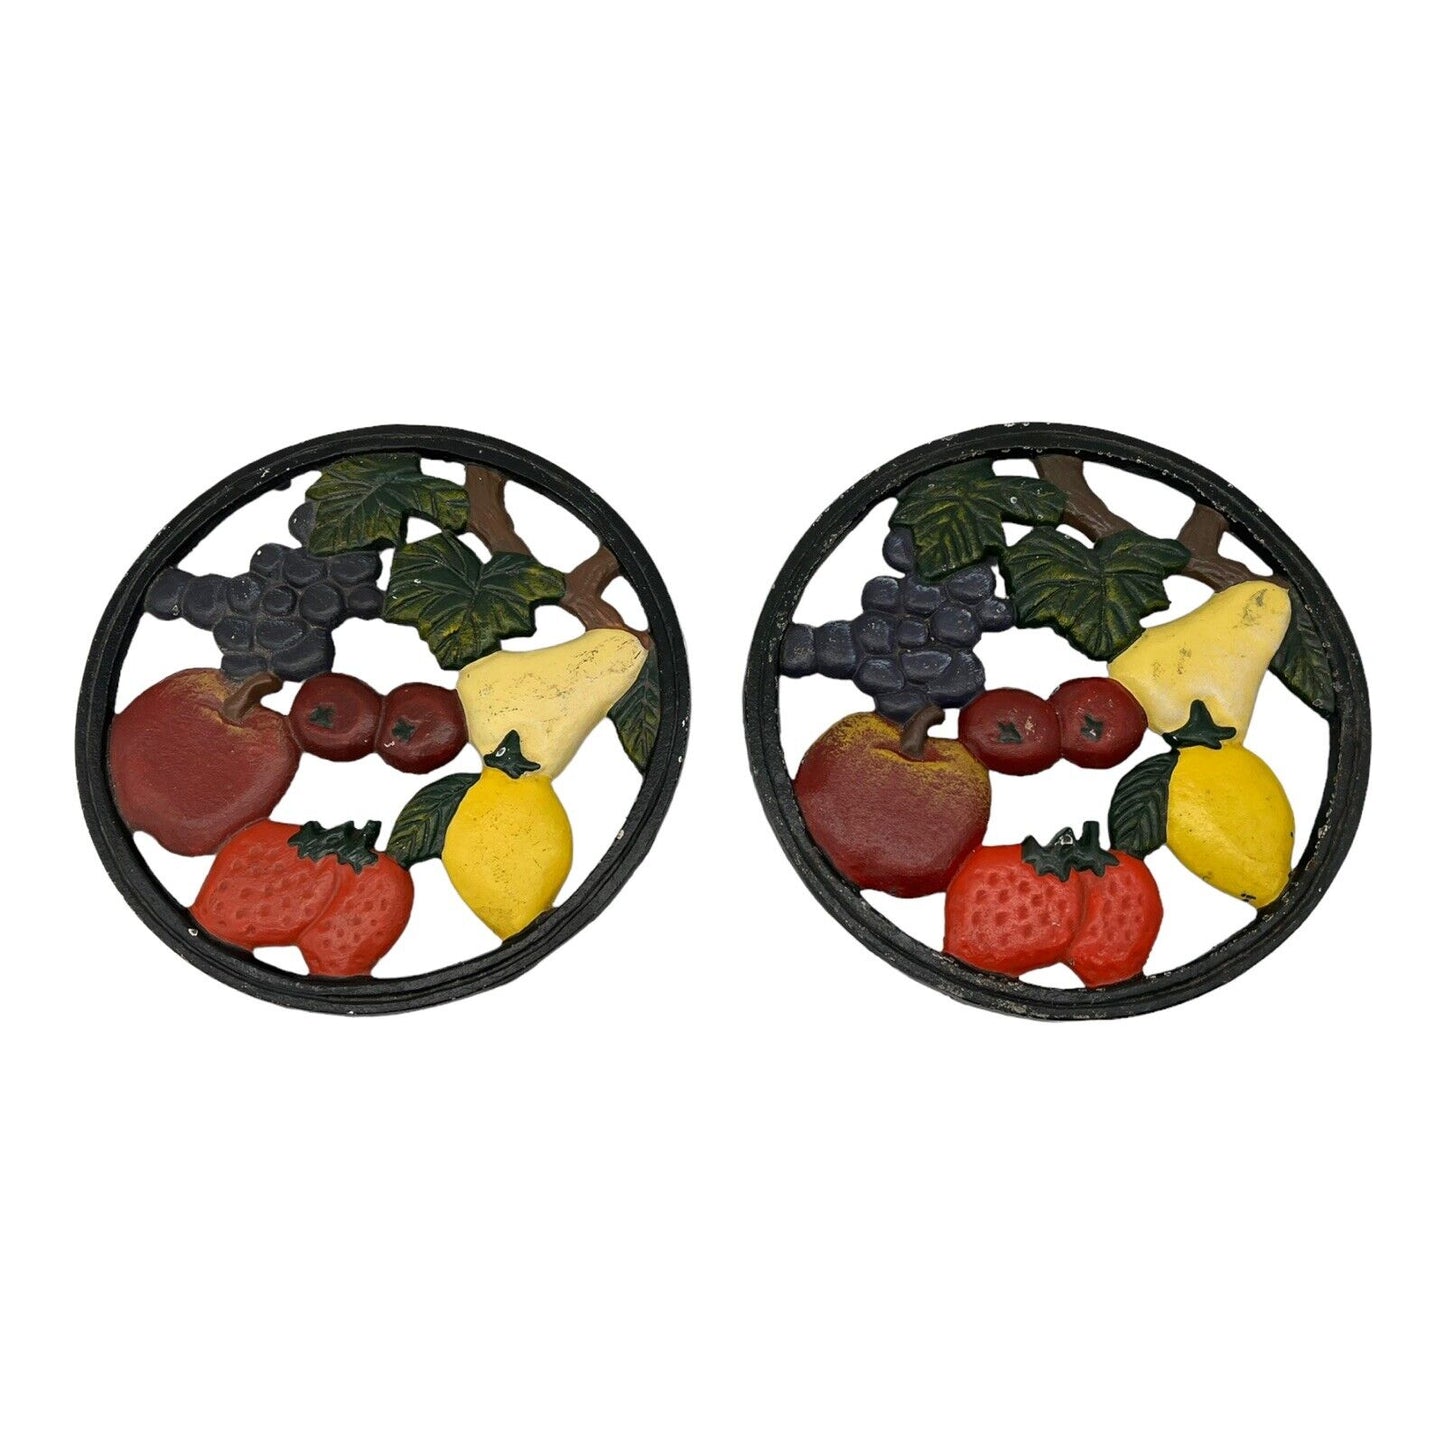 Pair of French cast iron pan trivets sold by All Things French Store